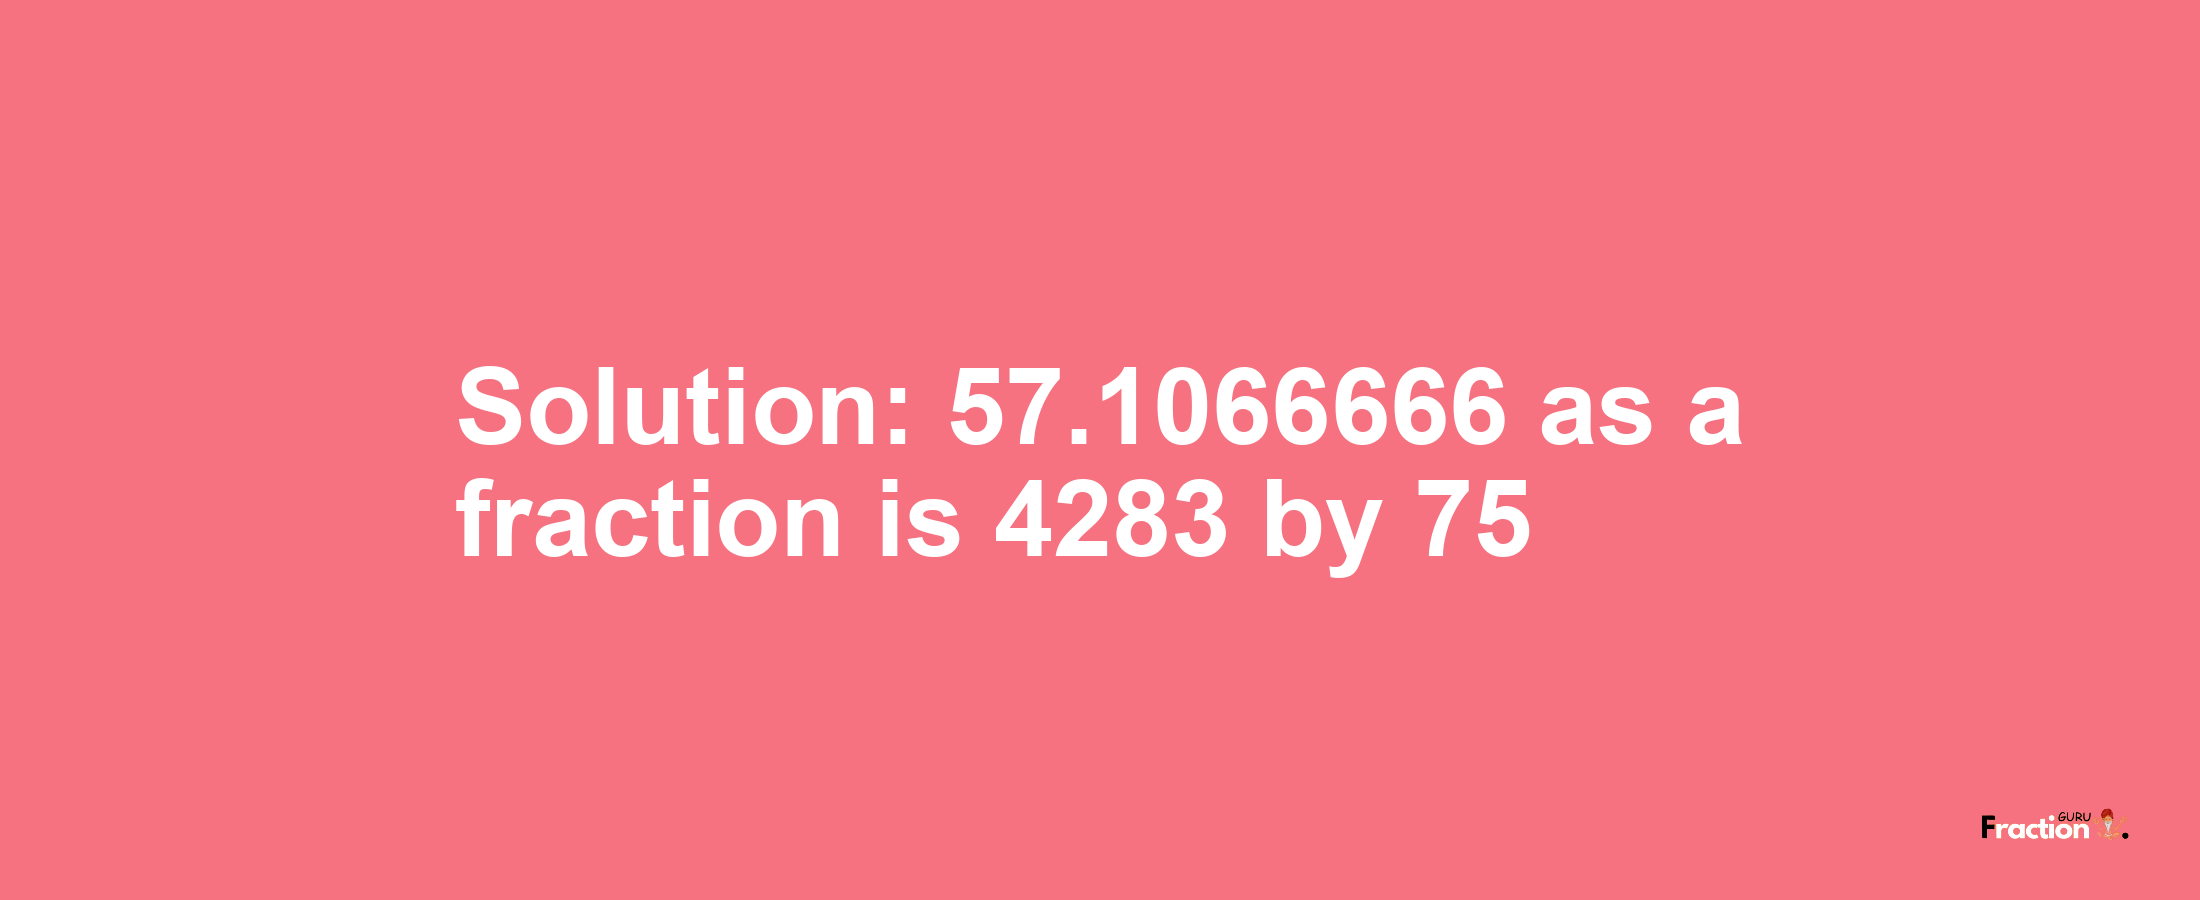 Solution:57.1066666 as a fraction is 4283/75